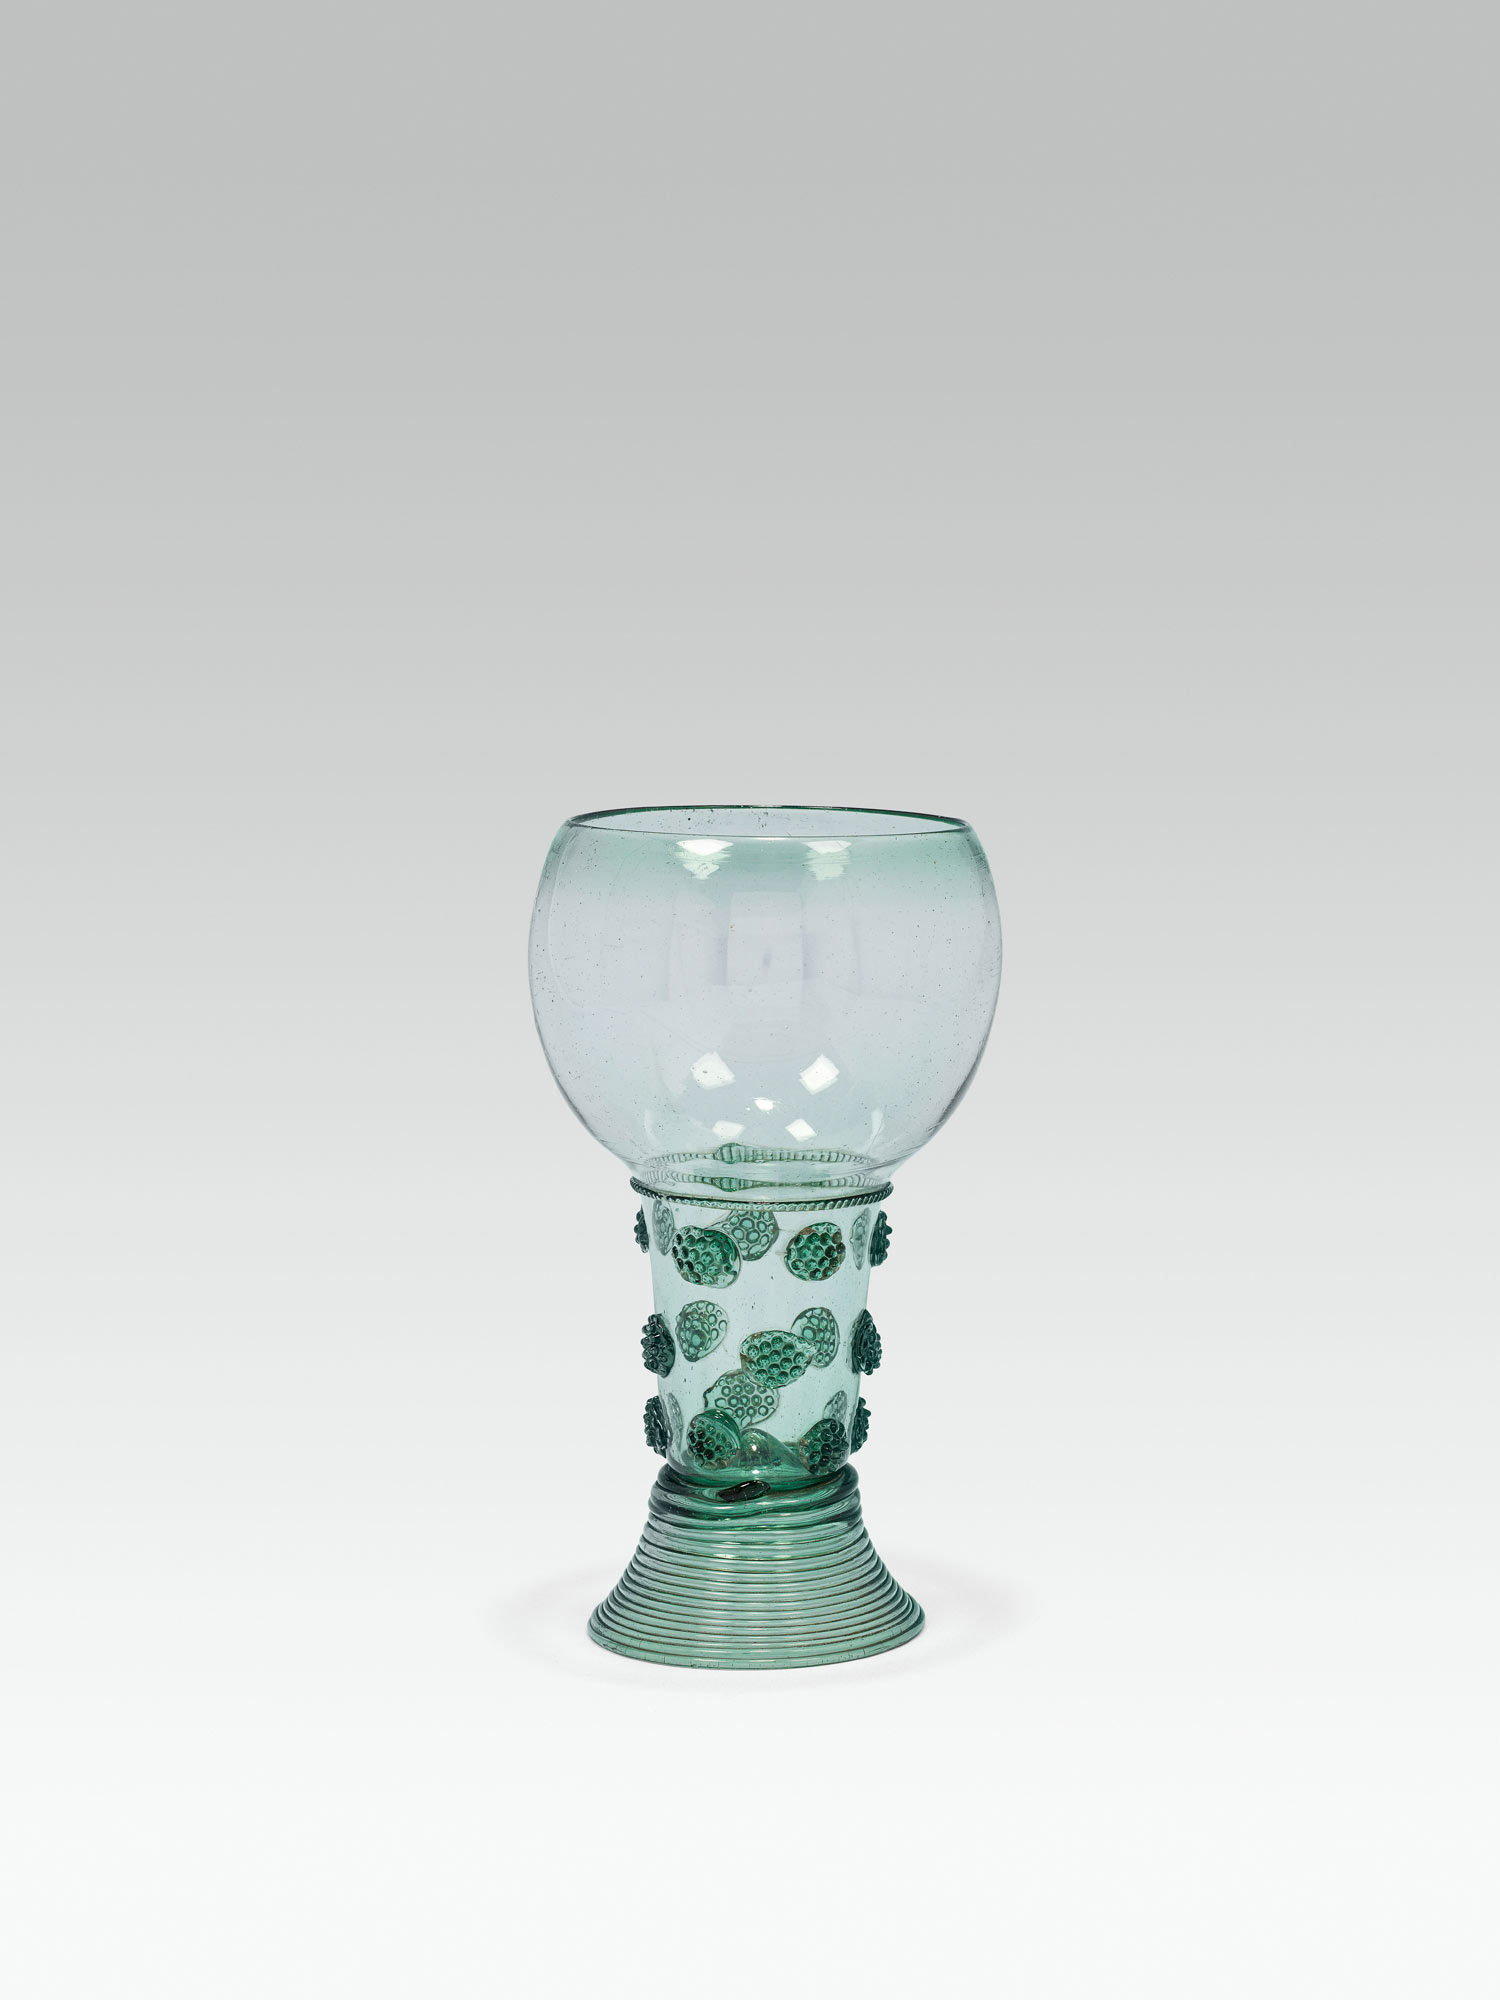 Large Römergreen glass; rased base with pontil mark; spun, conical foot; cylindrical, hollow shaft